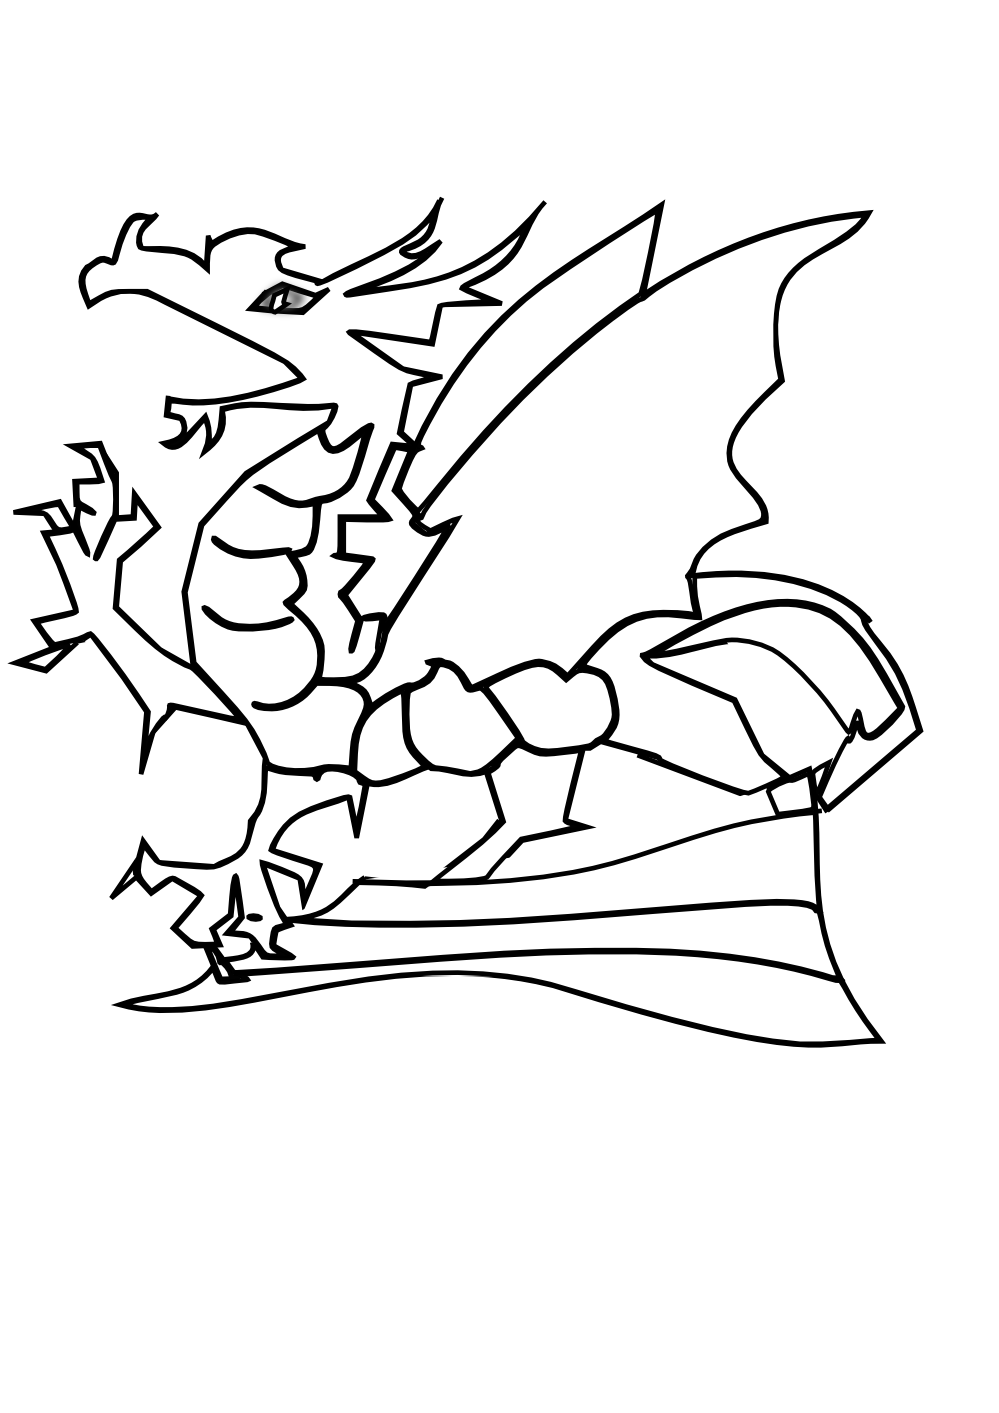 White Dragon clipart #13, Download drawings